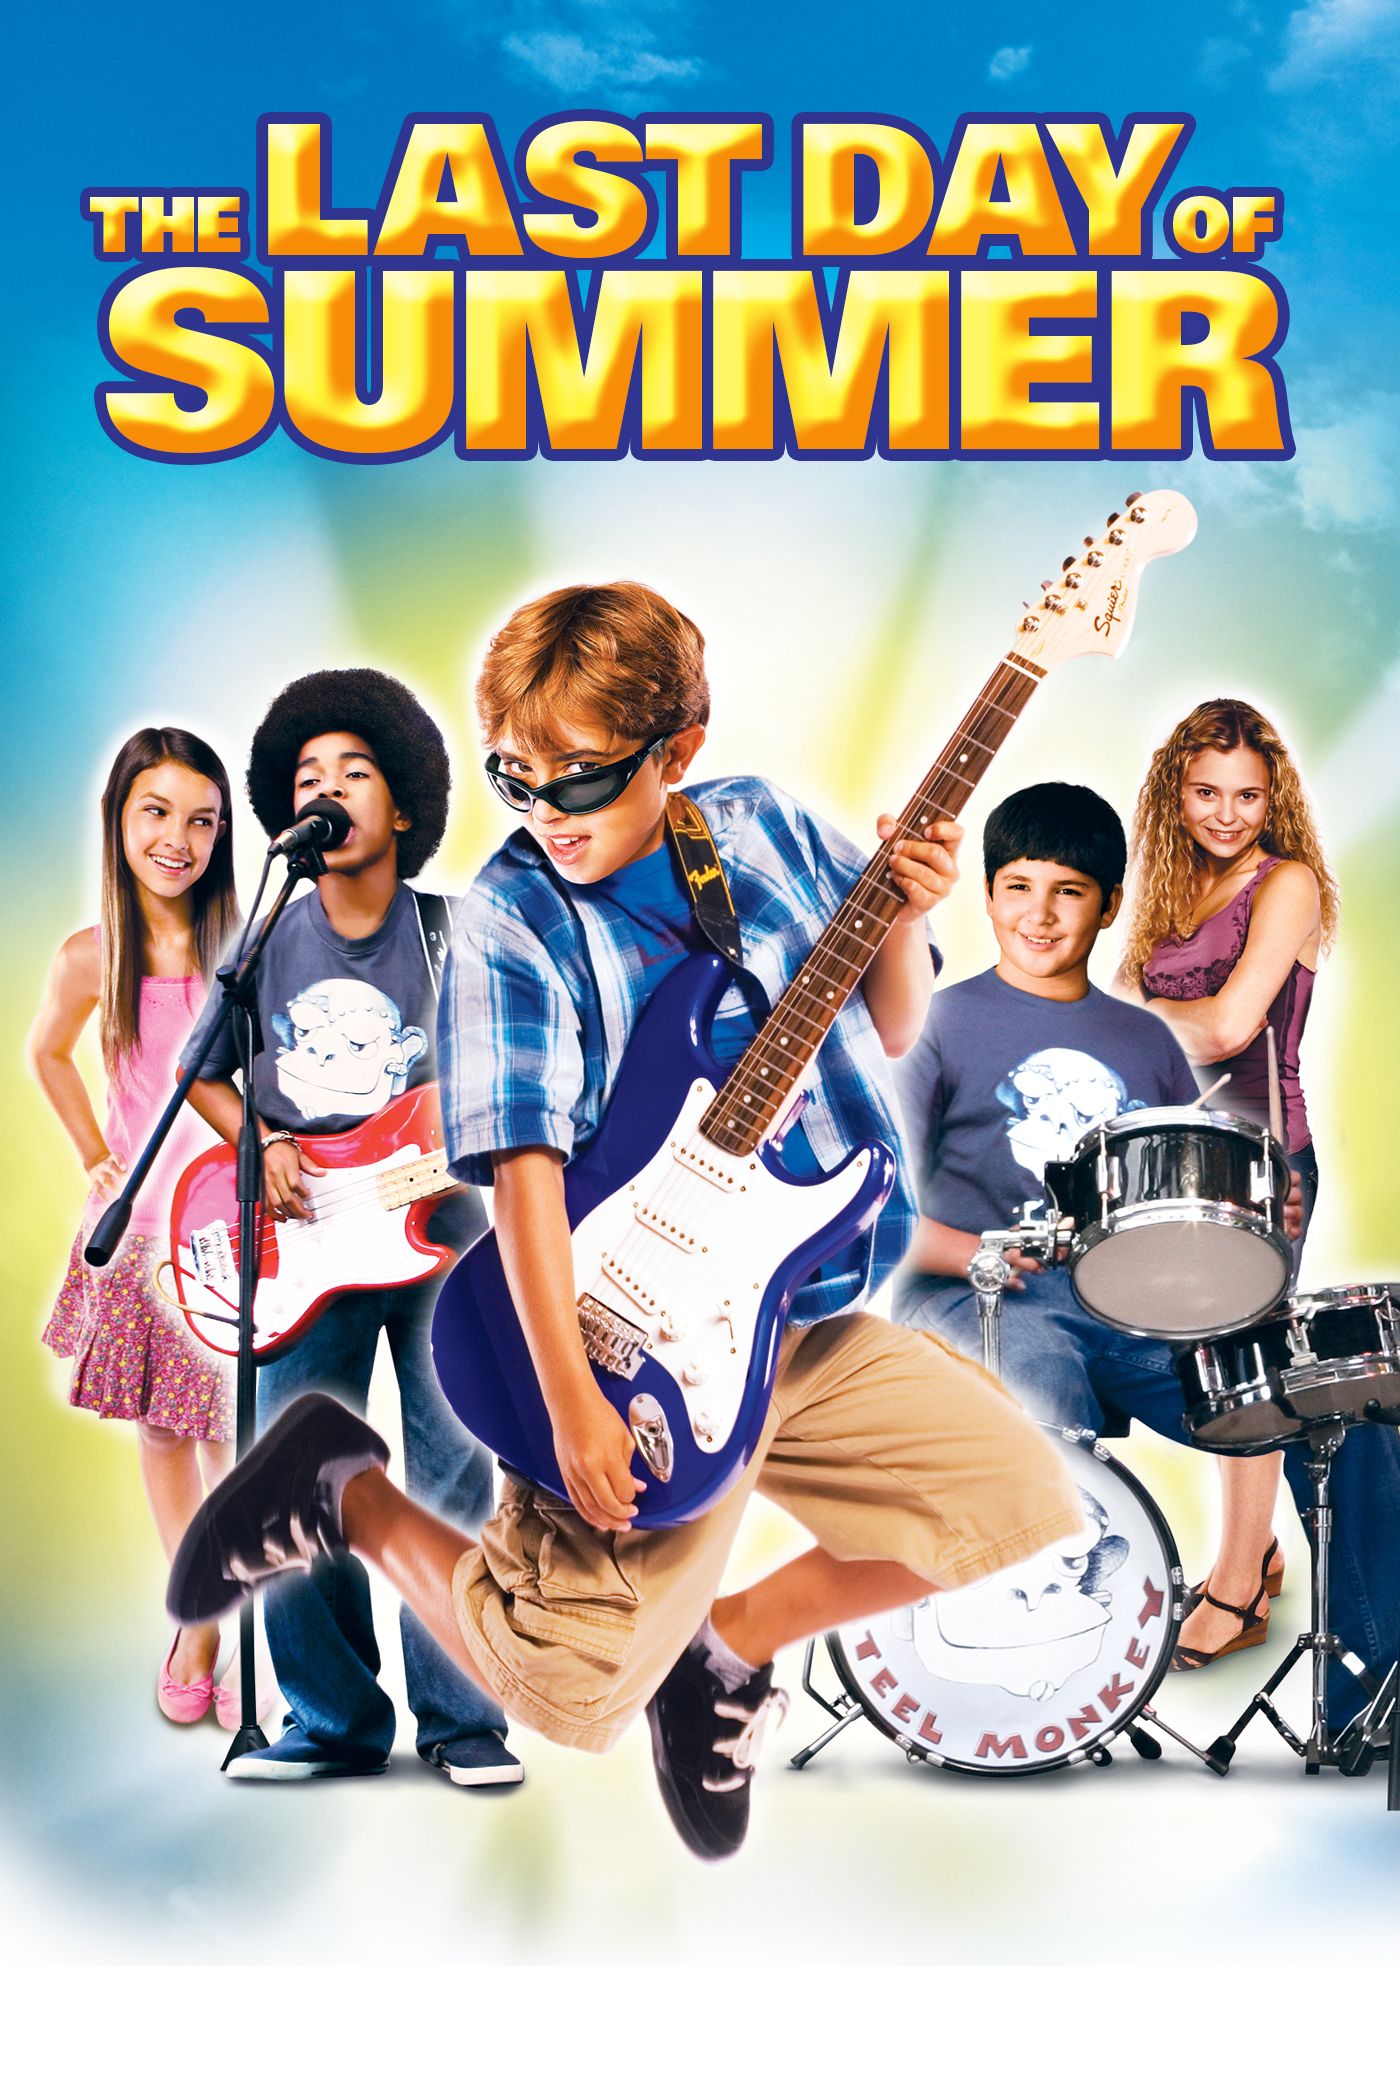 The Last Day of Summer (2007) Screenshot 3